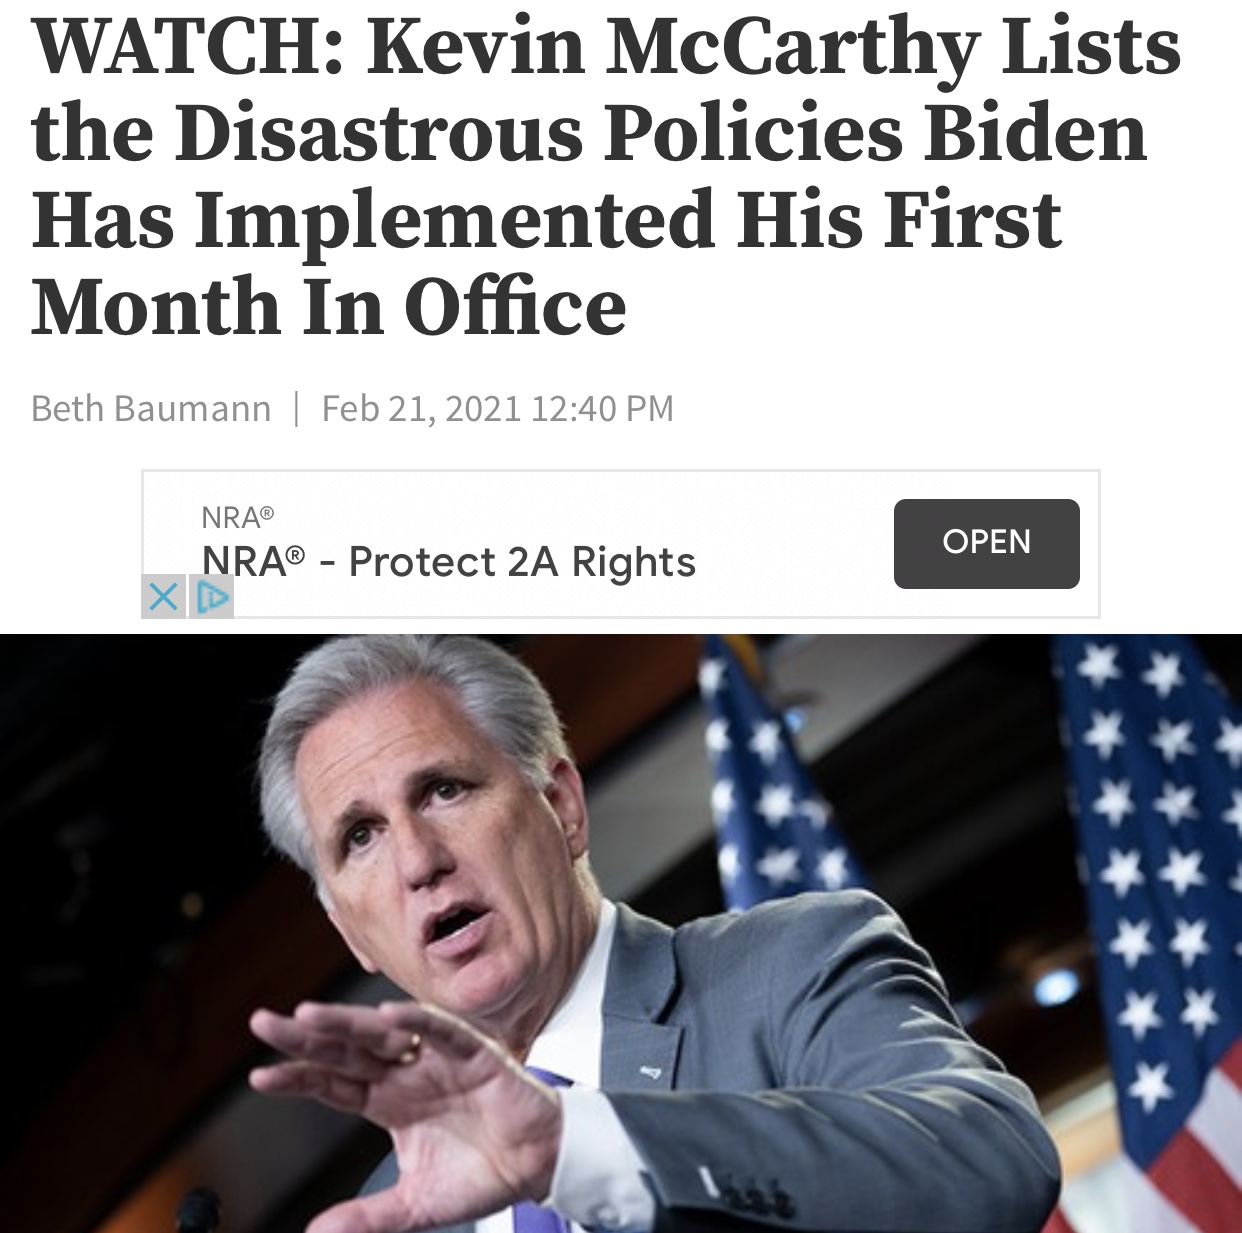 WATCH: Kevin McCarthy Lists the Disastrous Policies Biden Has Implemented His First Month In Office